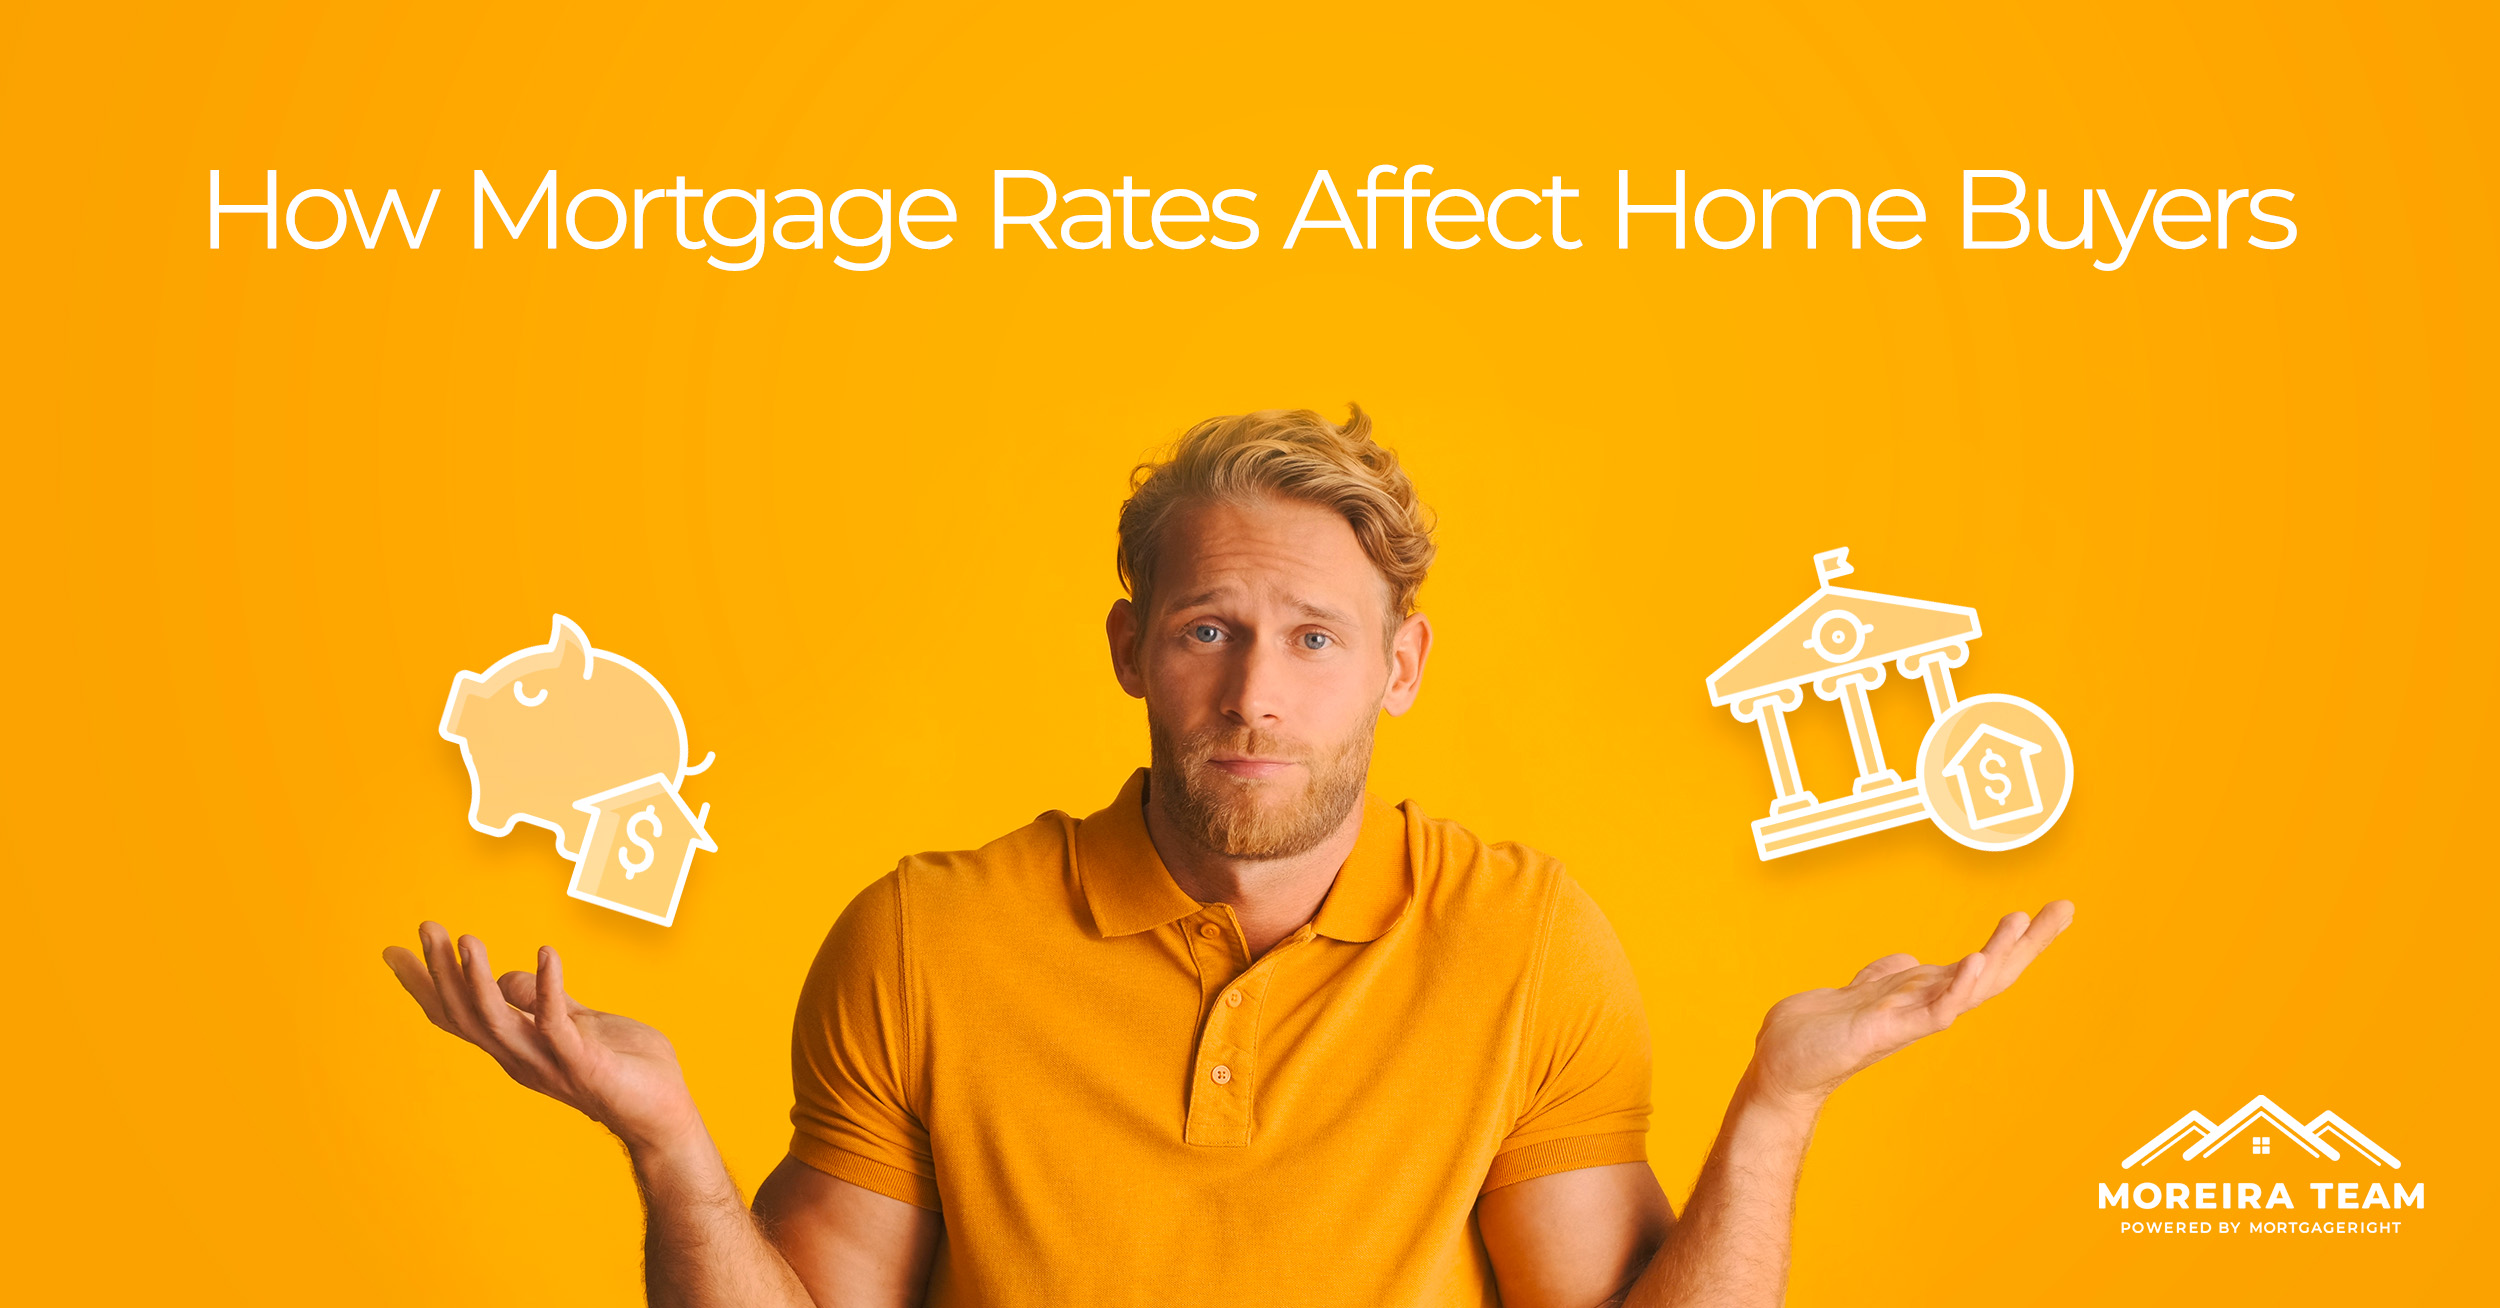 How Mortgage Rates Affect Home Buyers